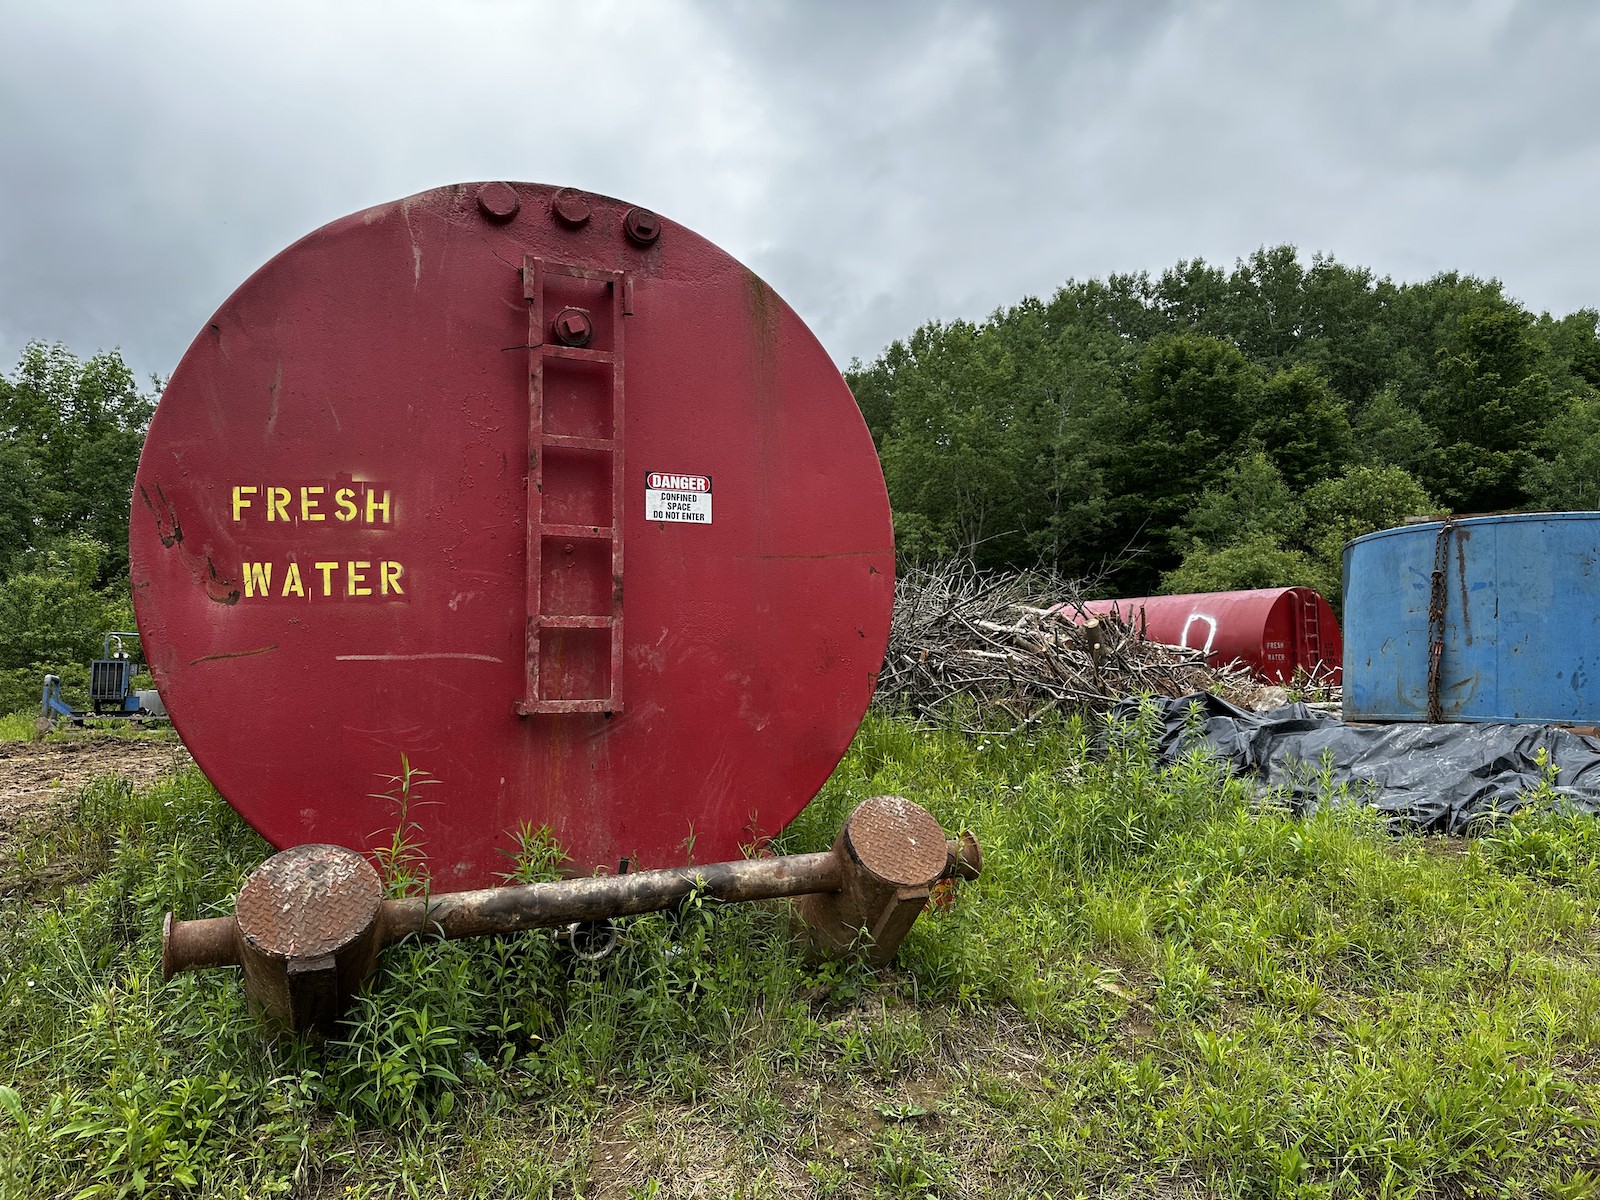 A large red container for holding water pulled from abandoned oil wells